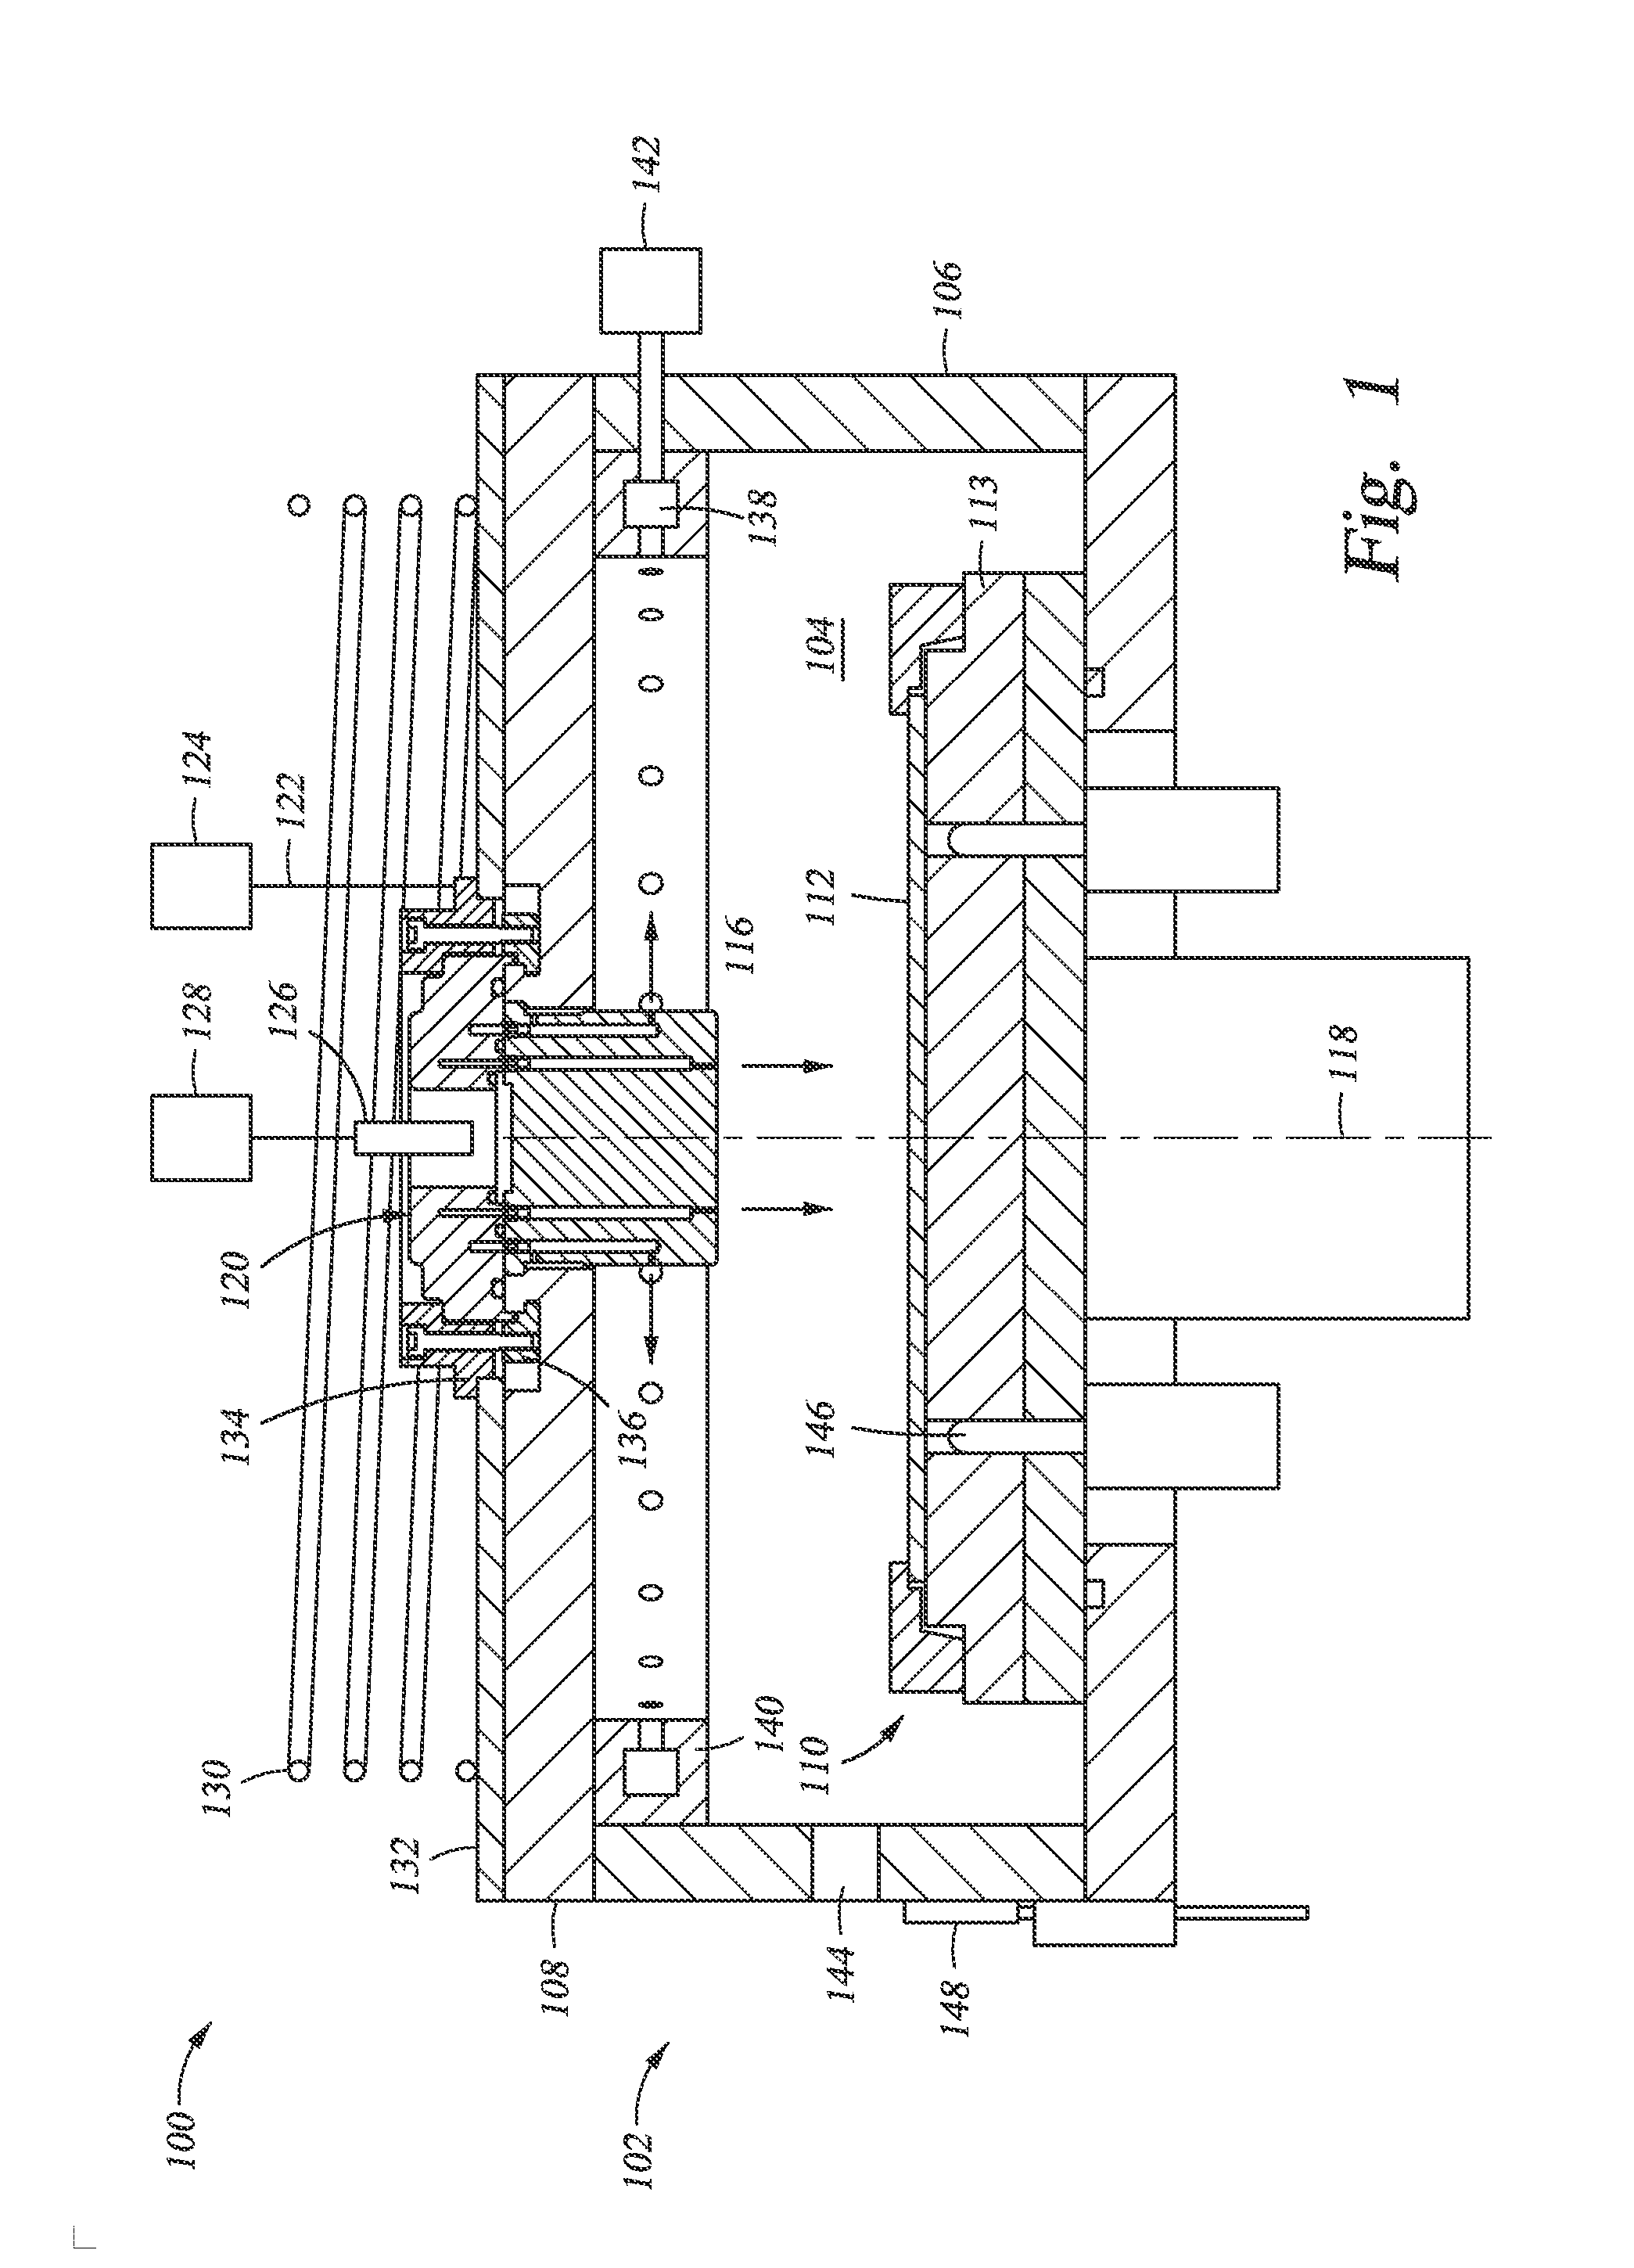 Tunable gas delivery assembly with internal diffuser and angular injection